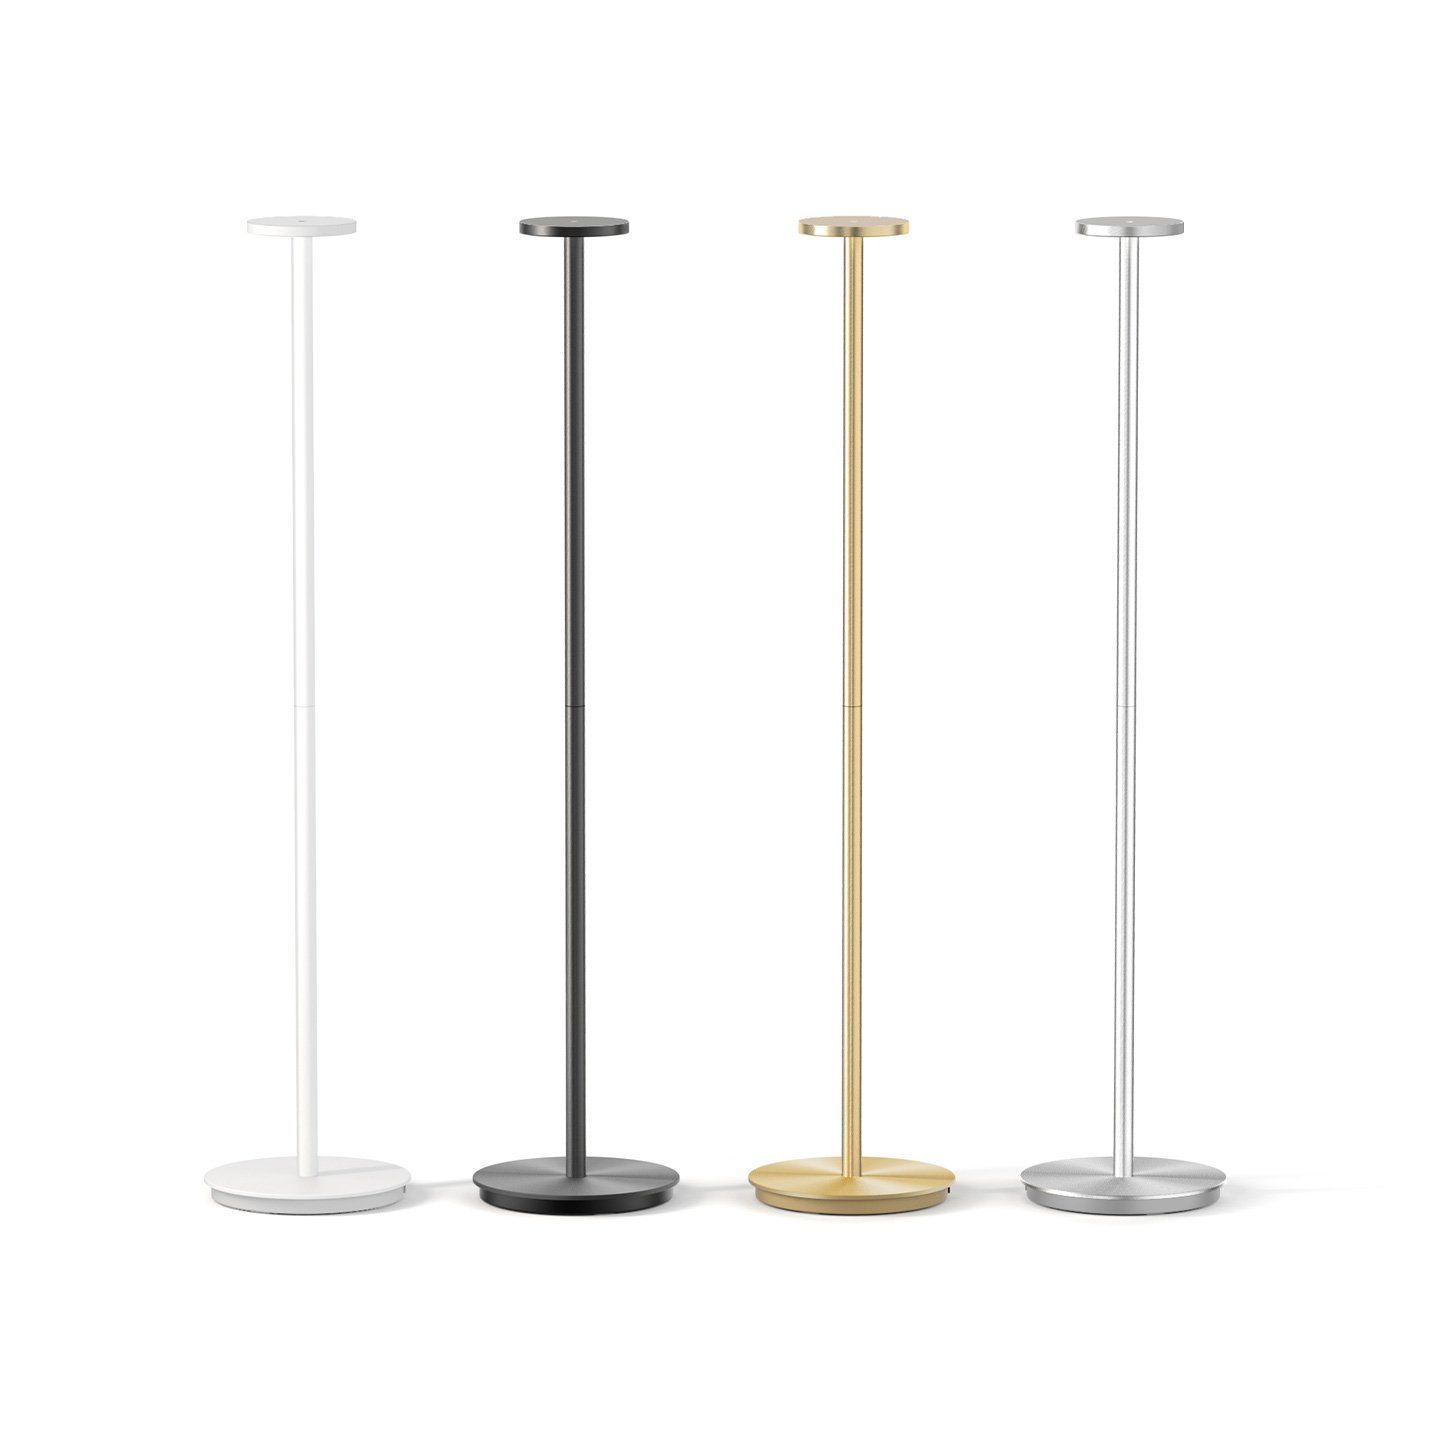 Luci lamp creates a zone of warm-dim illumination that suits all aspects of daily life.